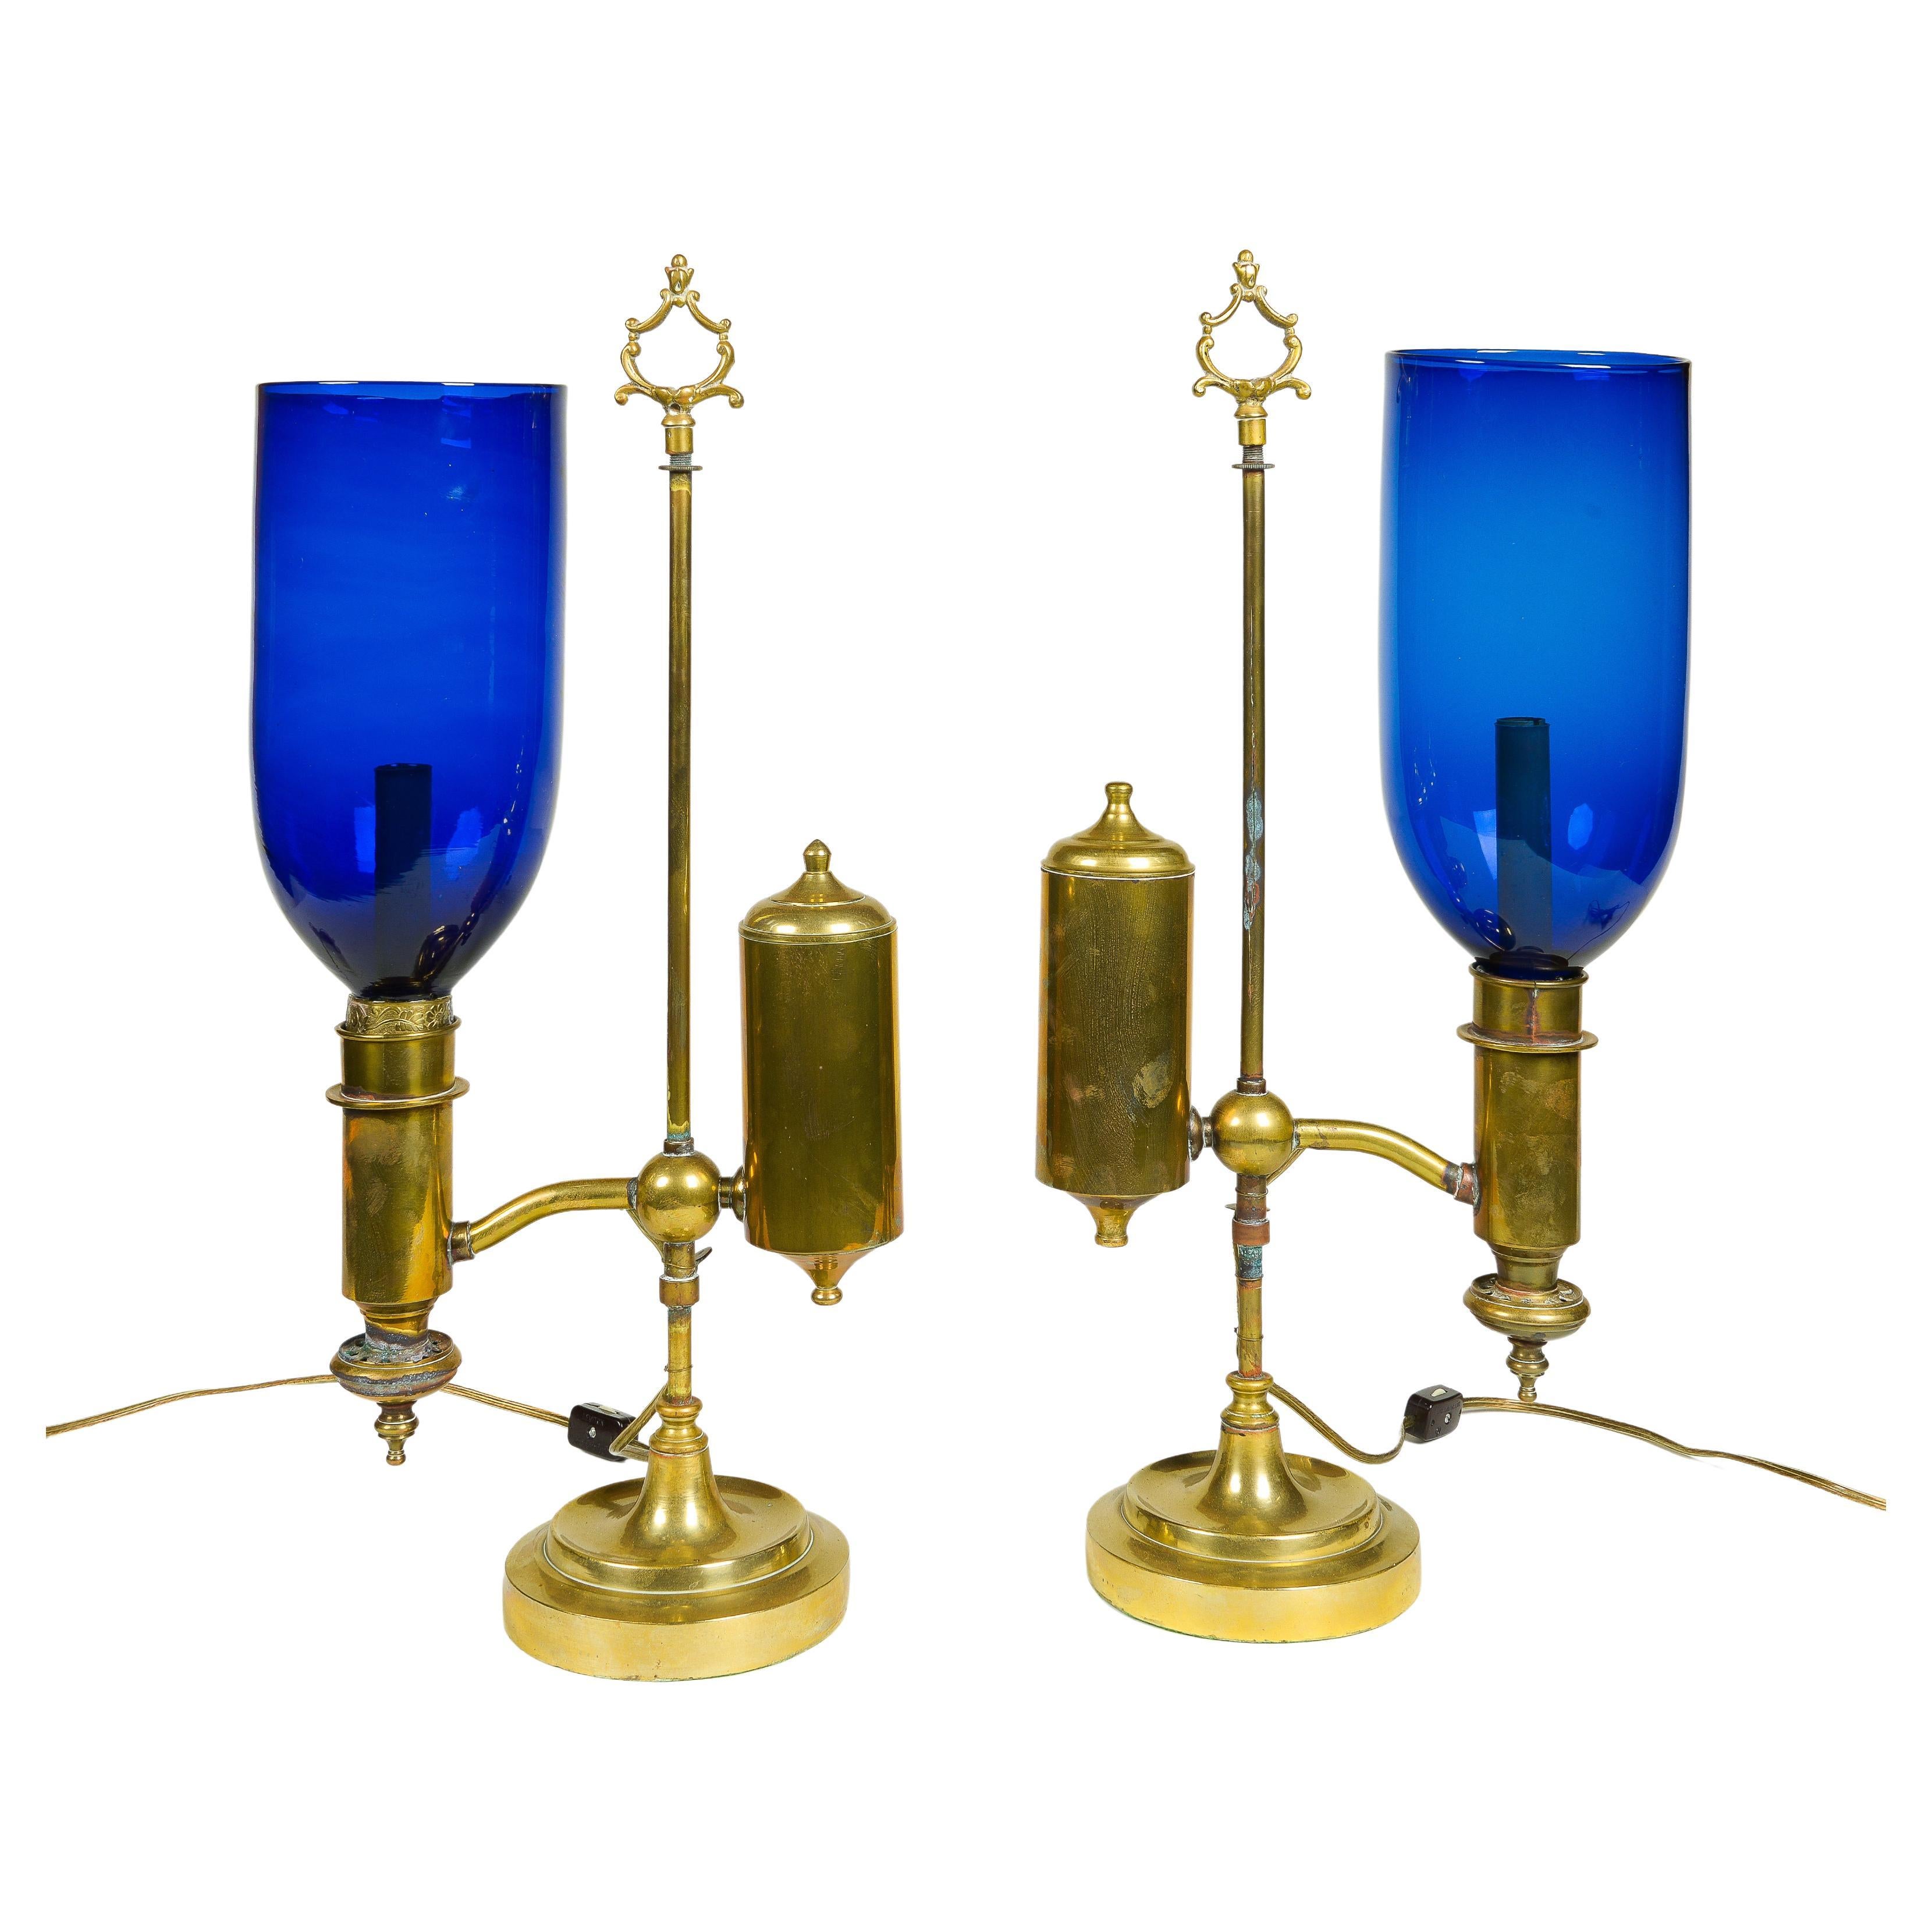 A Pair of English Student Brass Lamps with Blue Hurricane Shades